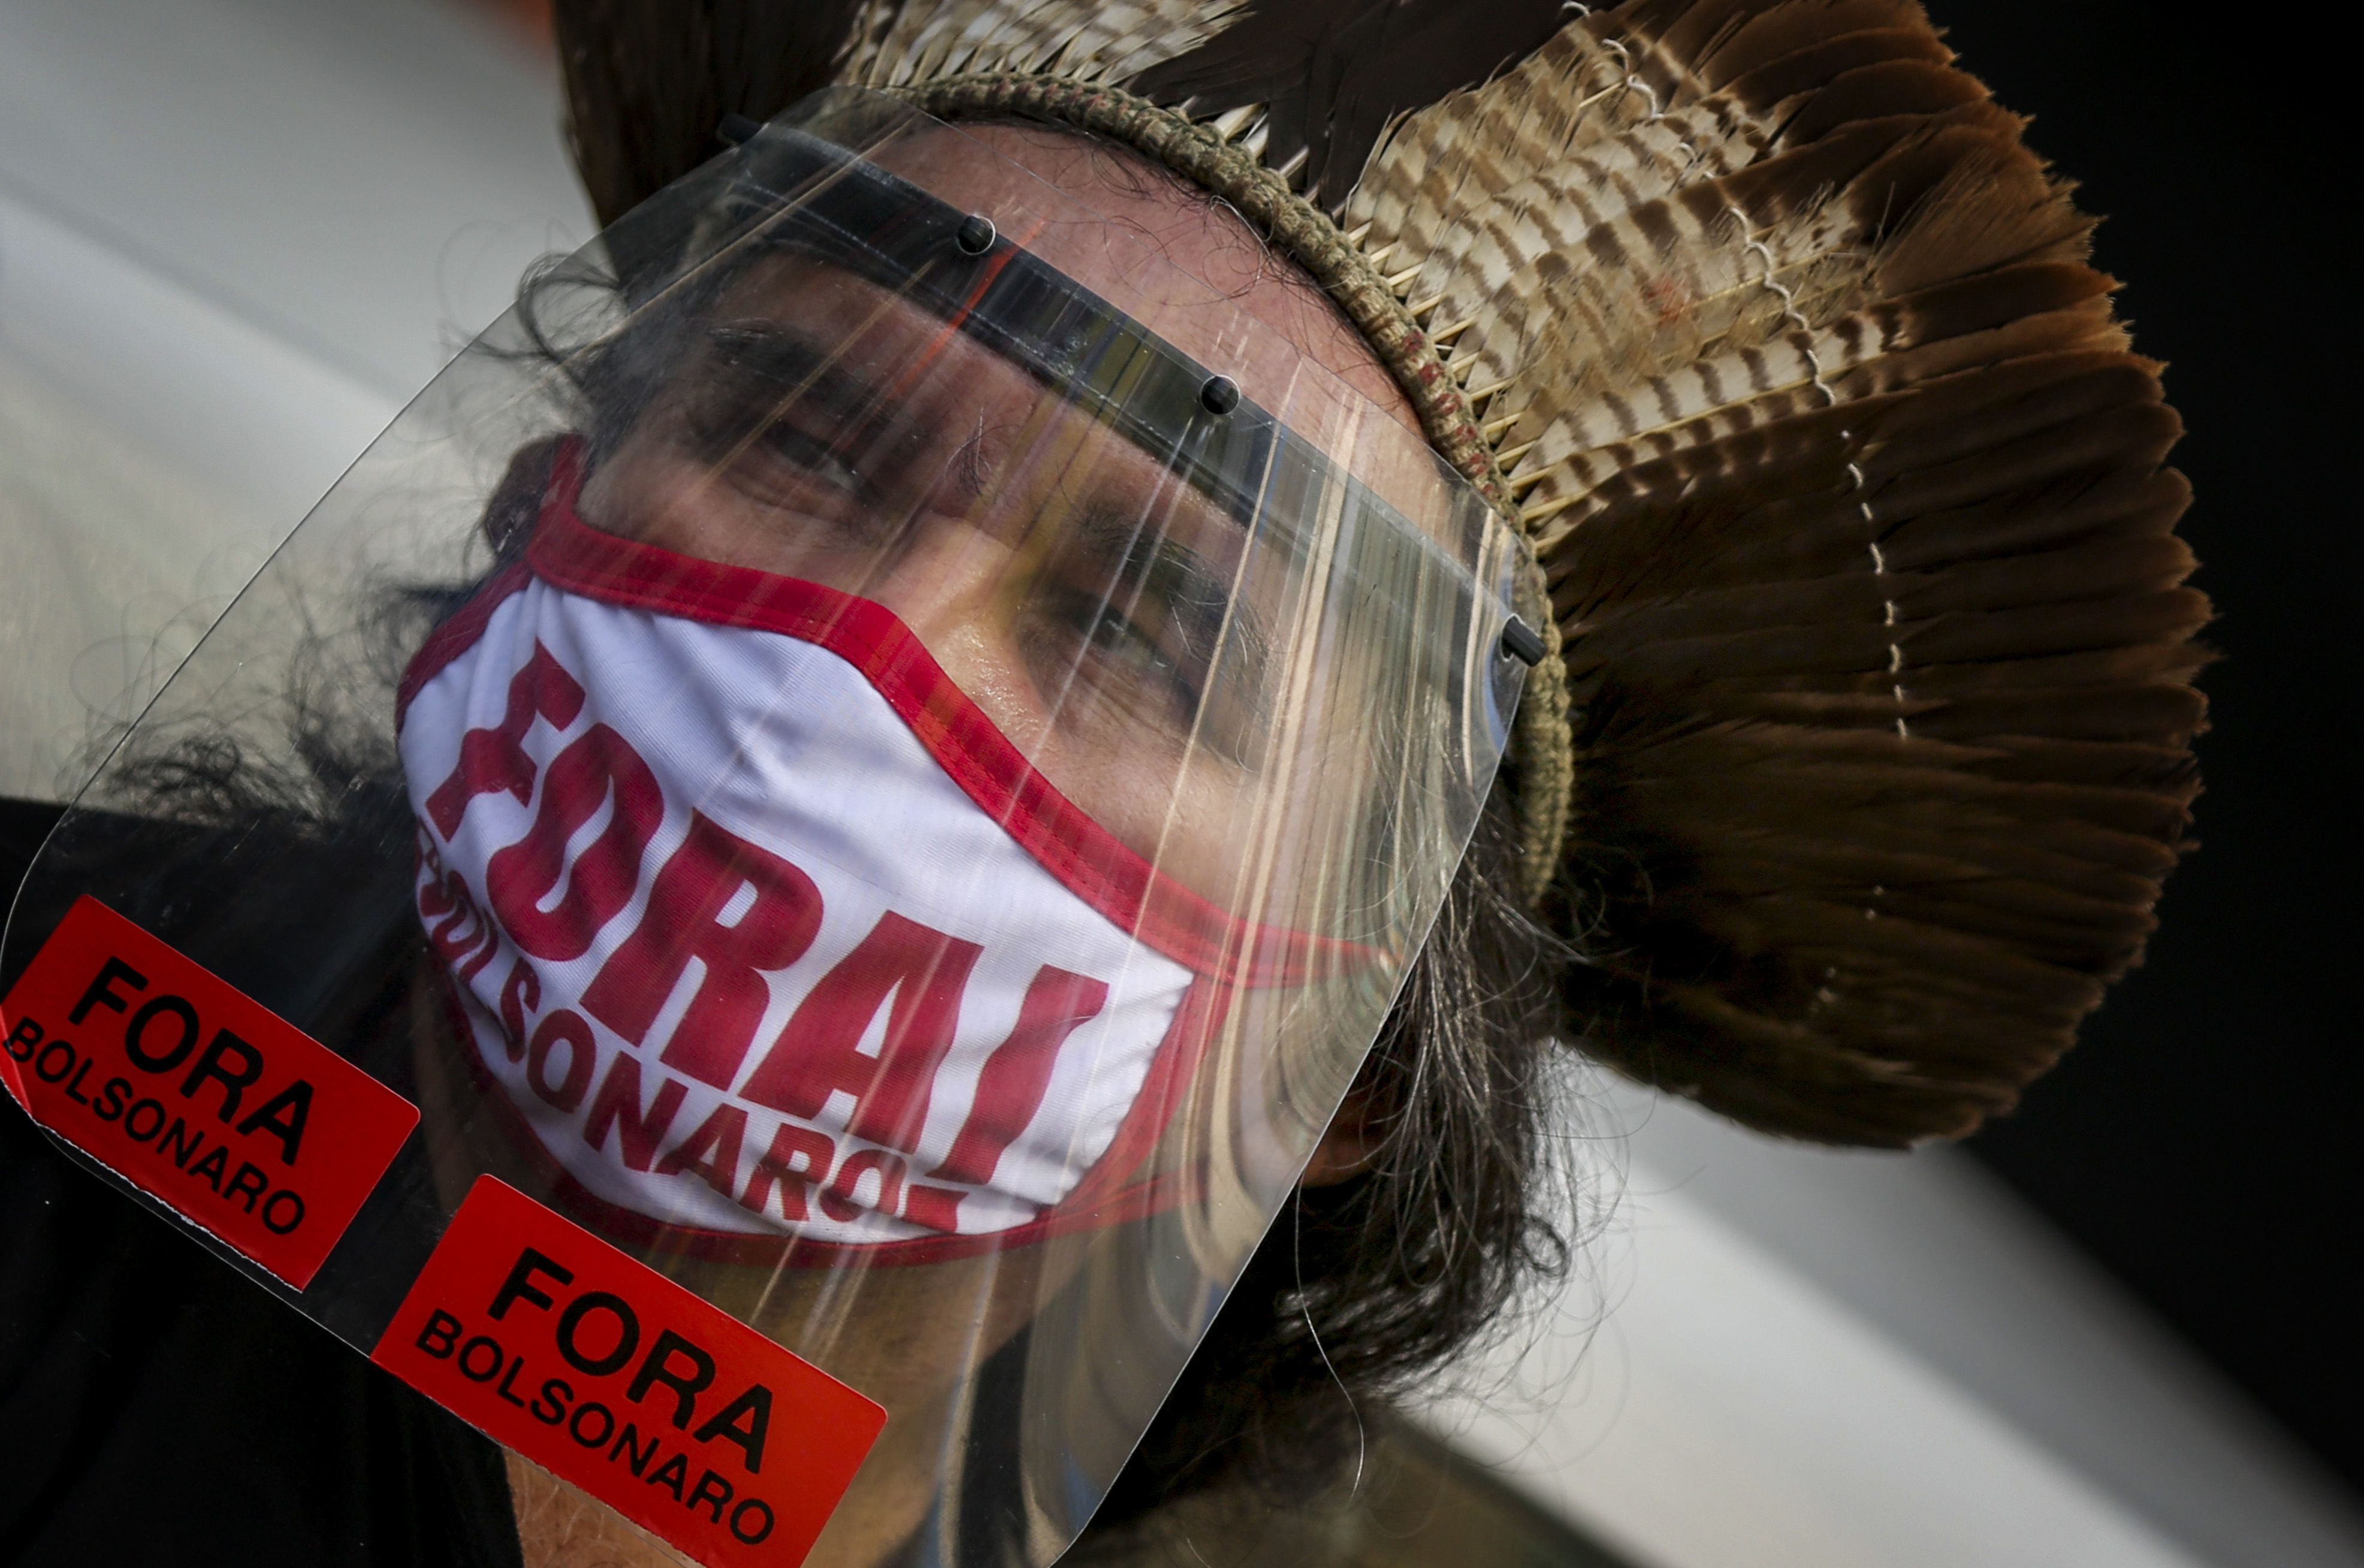  A demonstrator wears a protective face mask with the phrase in Portuguese: "Bolsonaro out" during a protest against his governement on May 29, 2021 in Rio de Janeiro, Brazil. 